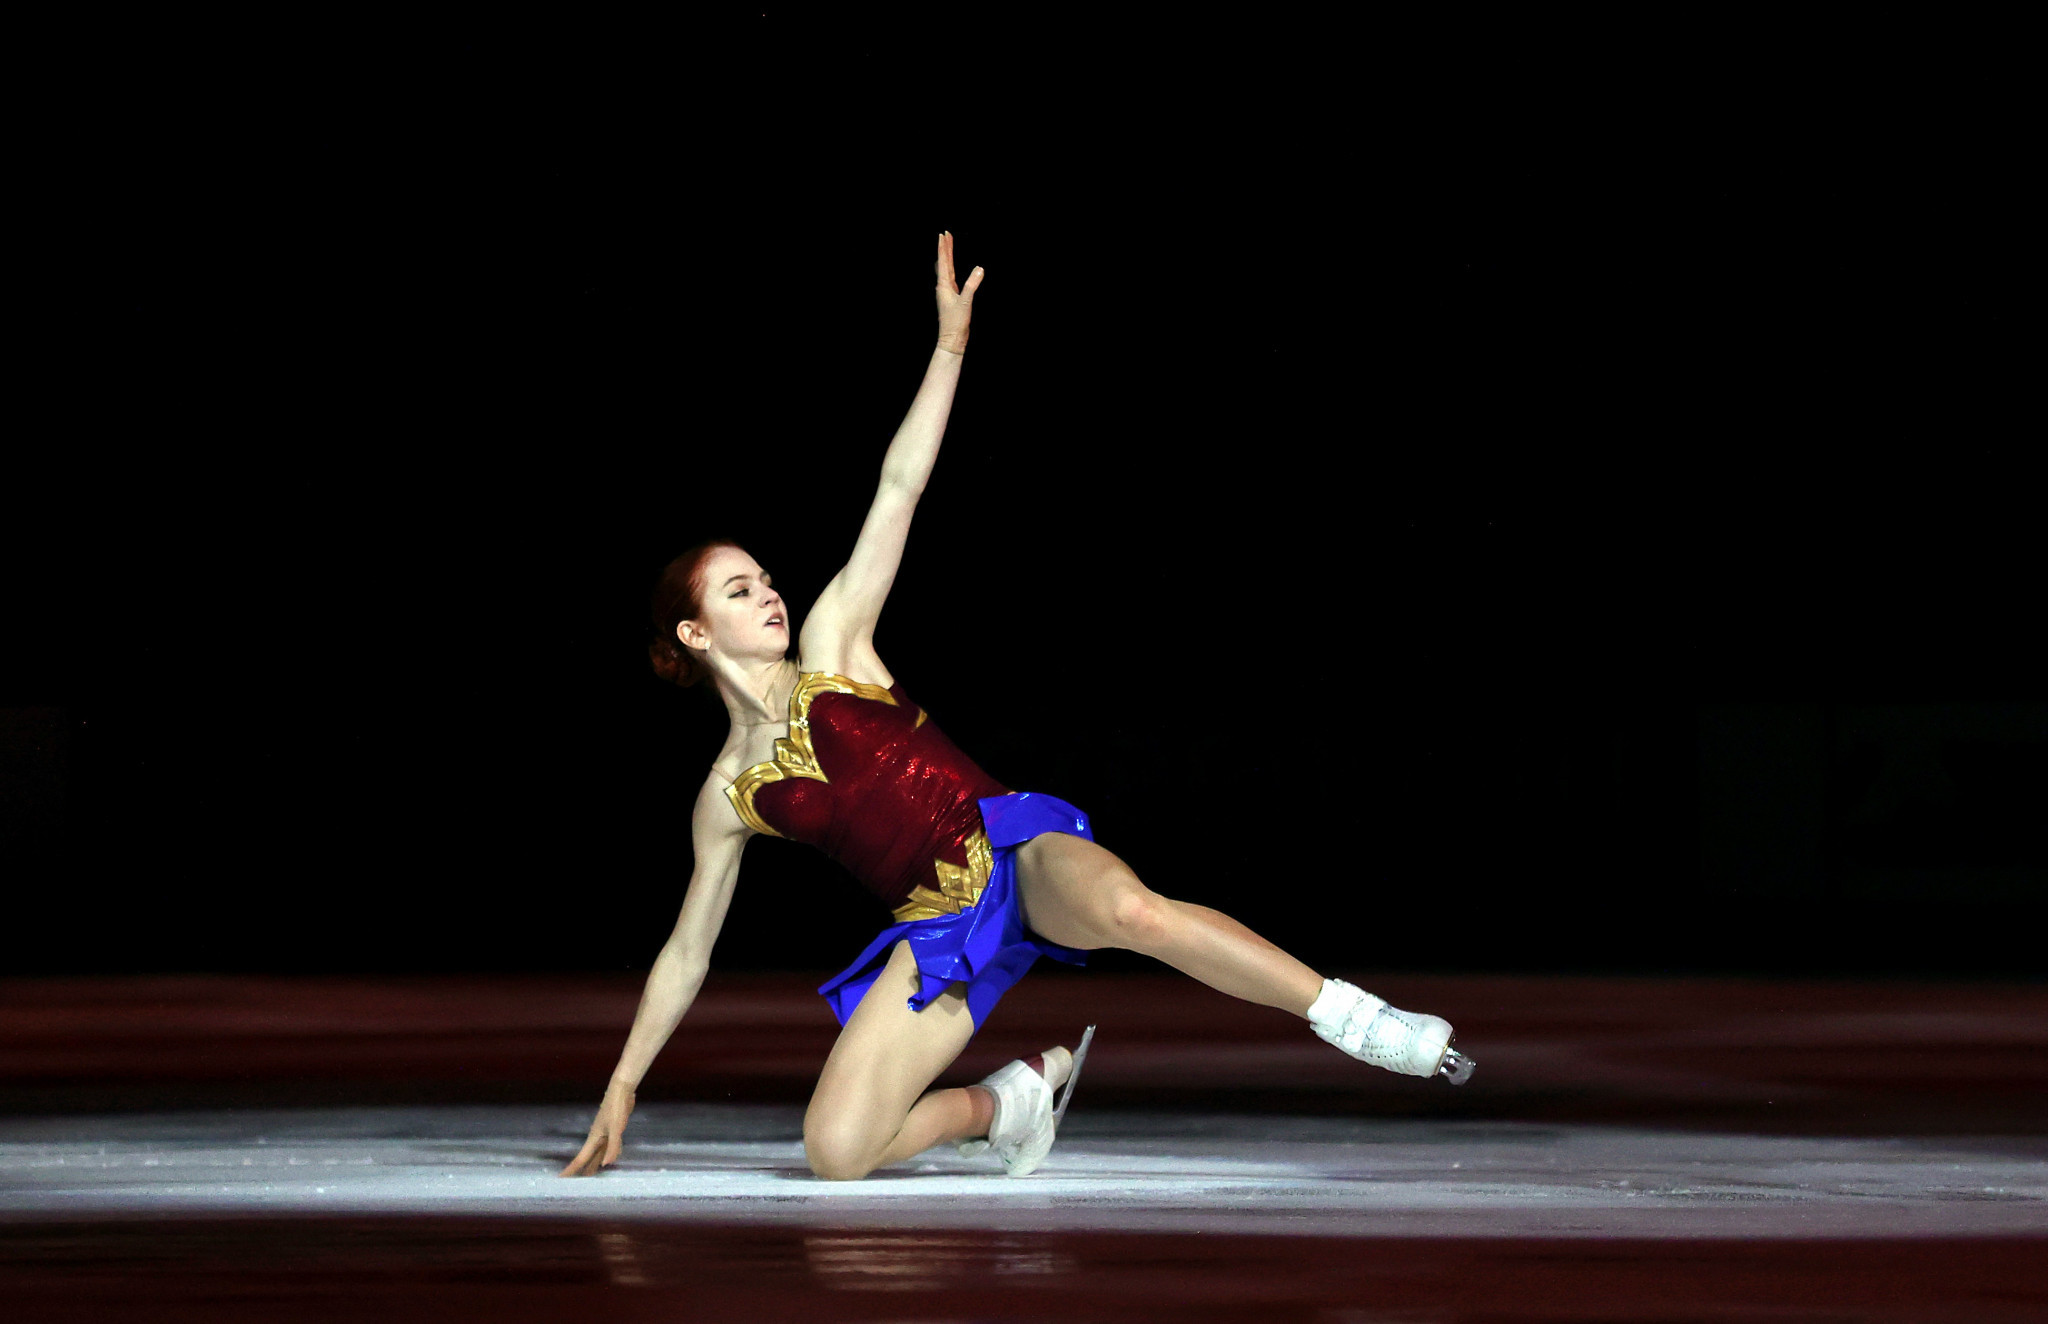 Alexandra Trusova backed up an impressive short programme routine with a superb free skating segment to clinch victory in Las Vegas ©Getty Images